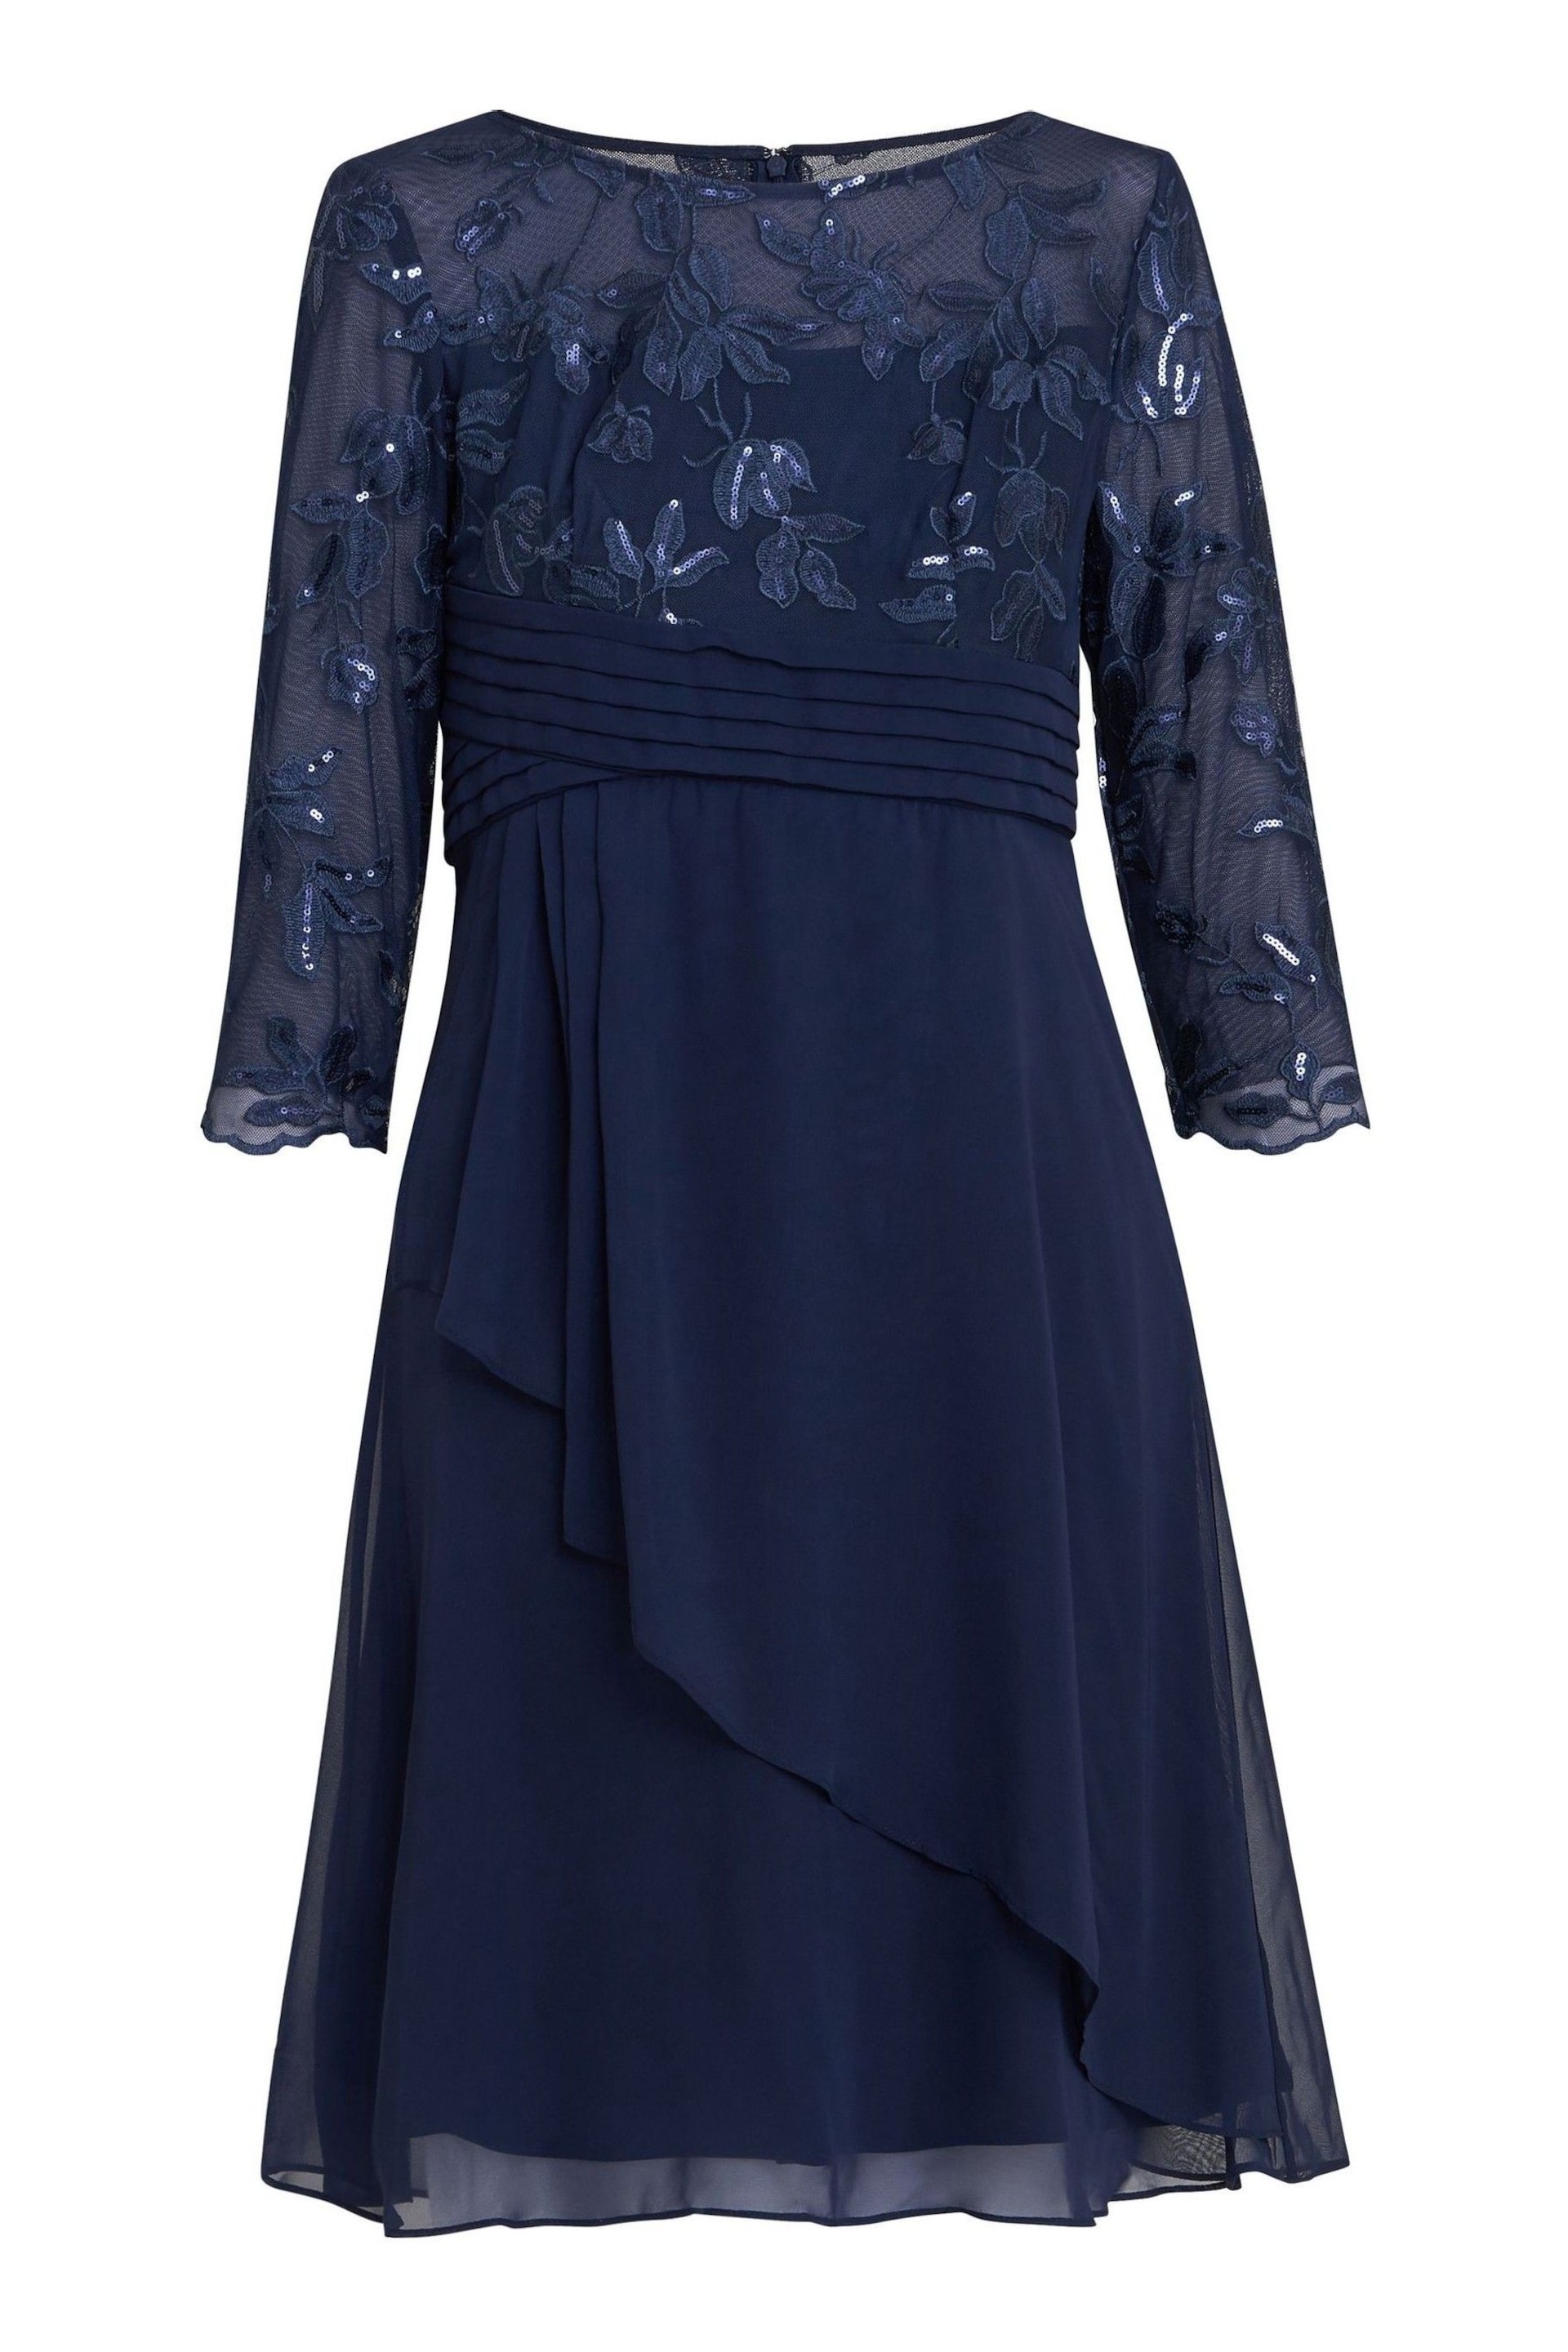 Gina Bacconi Thandie Petite Blue Embroidered Bodice Dress With Pleated Waist - Image 5 of 5